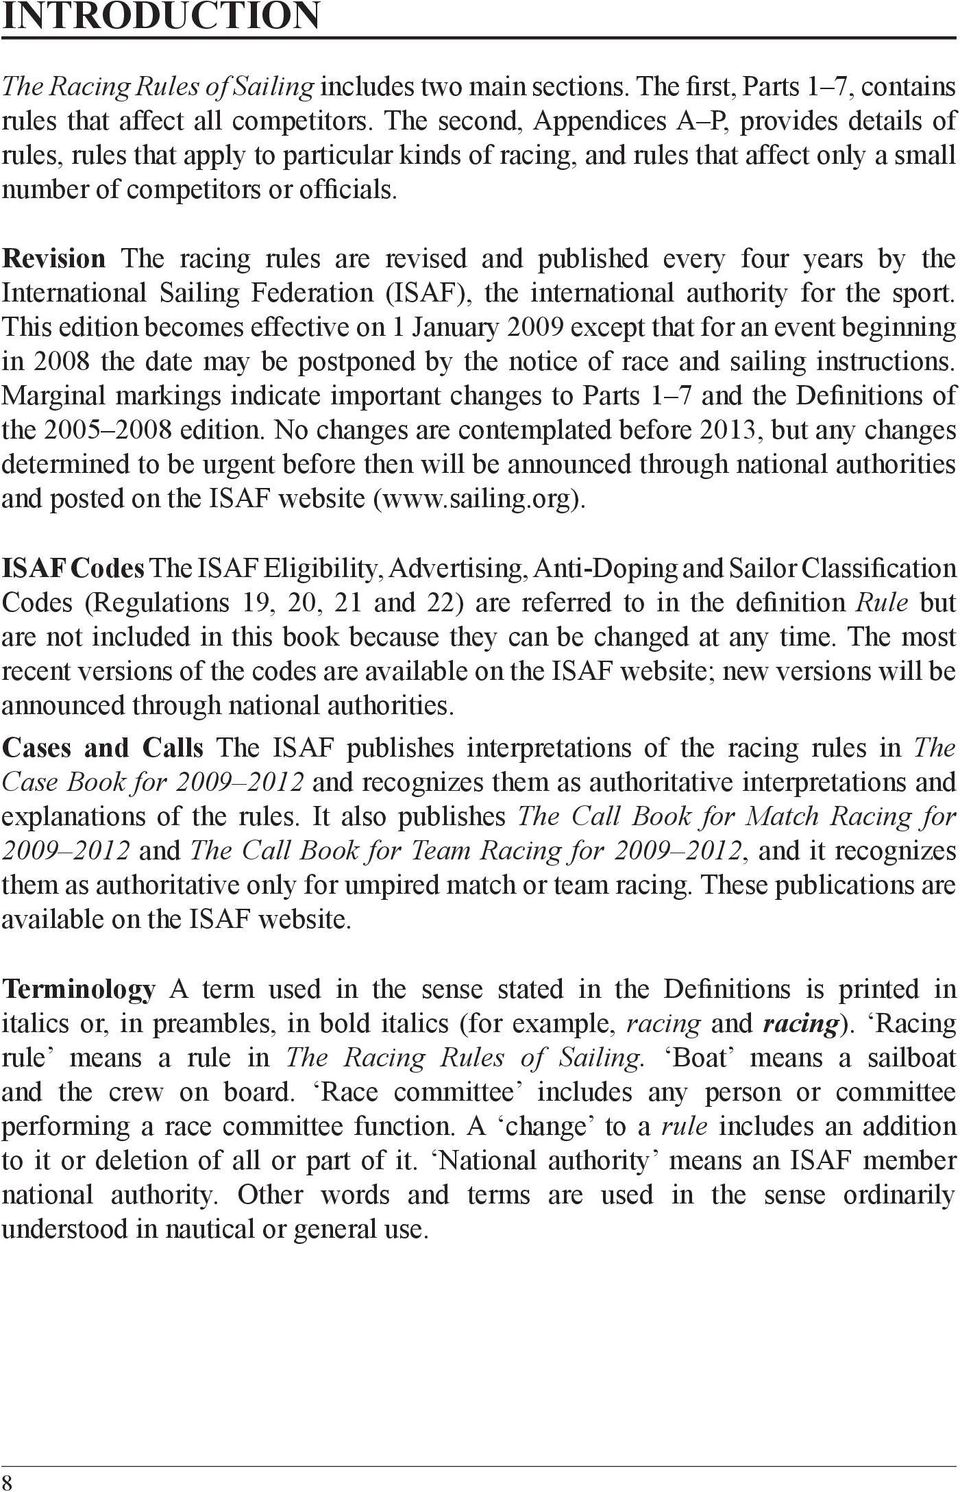 Revision The racing rules are revised and published every four years by the International Sailing Federation (ISAF), the international authority for the sport.